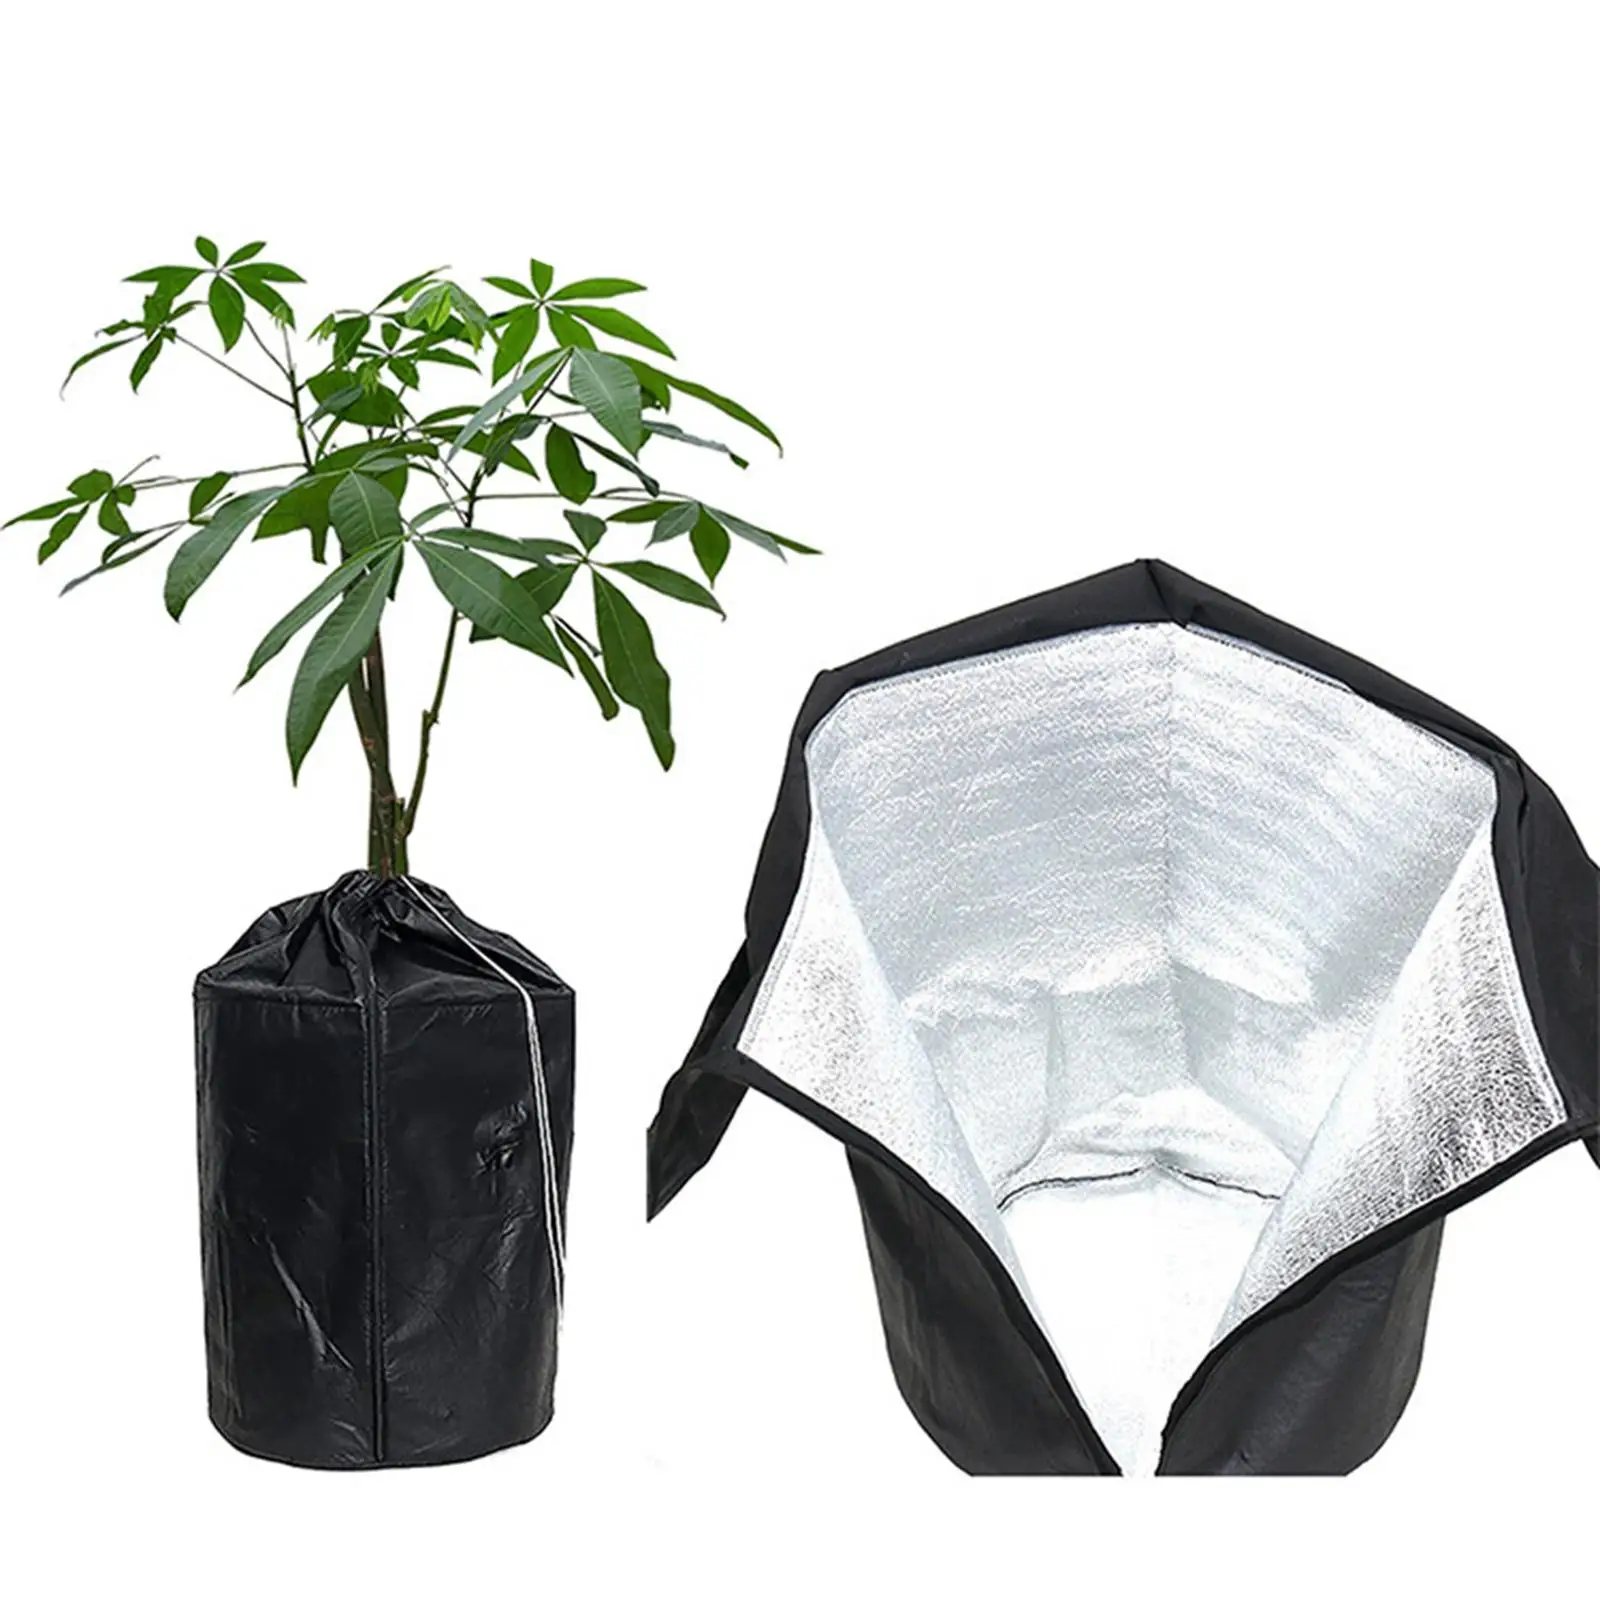 Frost Protection Cover Protection Freeze Protection for Potted Flowers